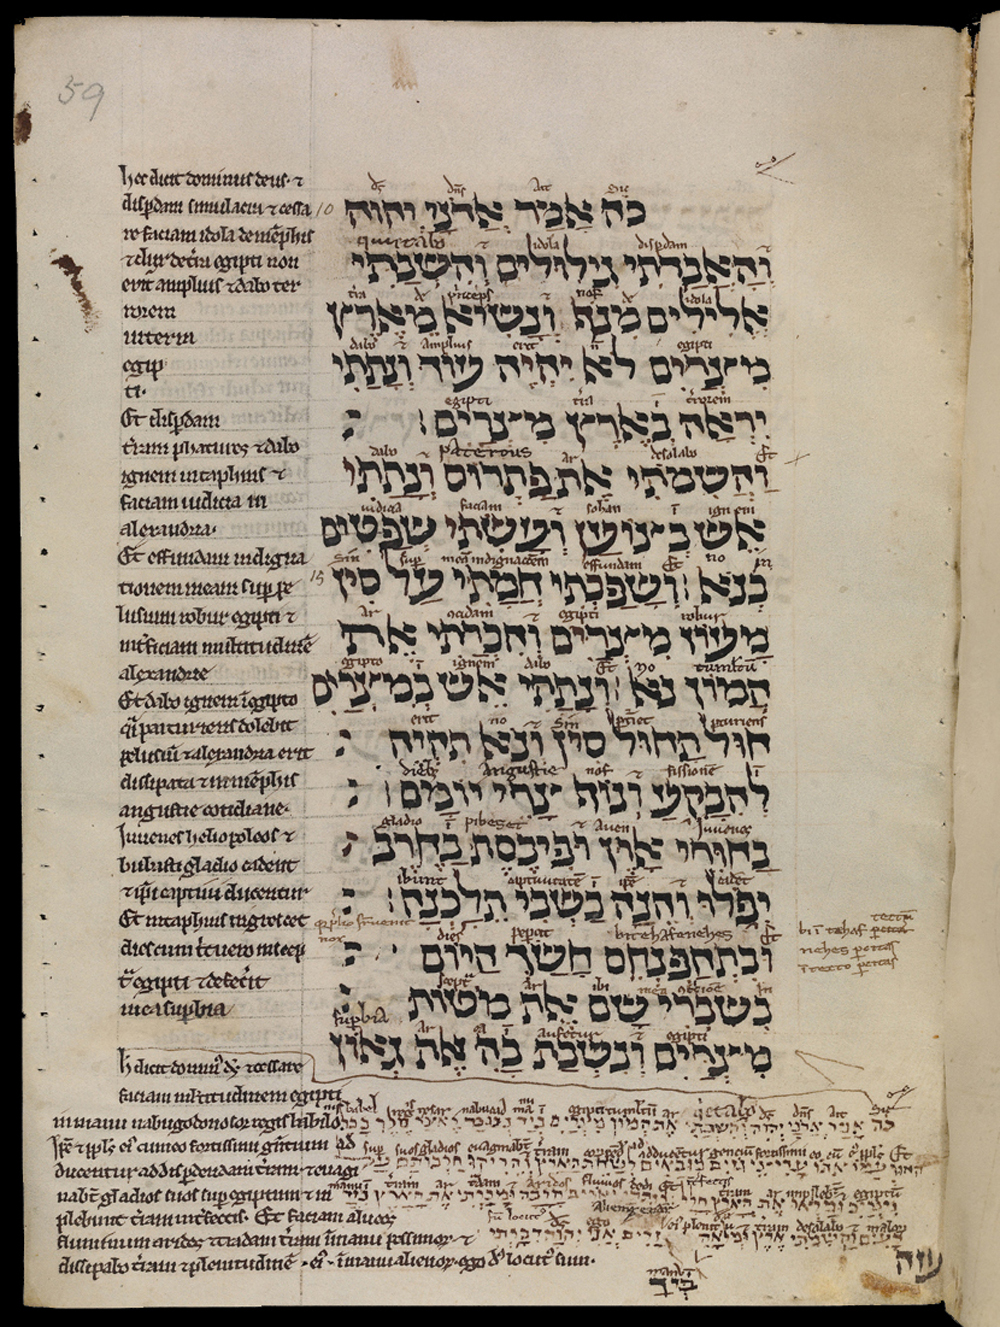 A page from the Book of Ezekiel (MS. Bodl. Or. 62, fol. 59a)